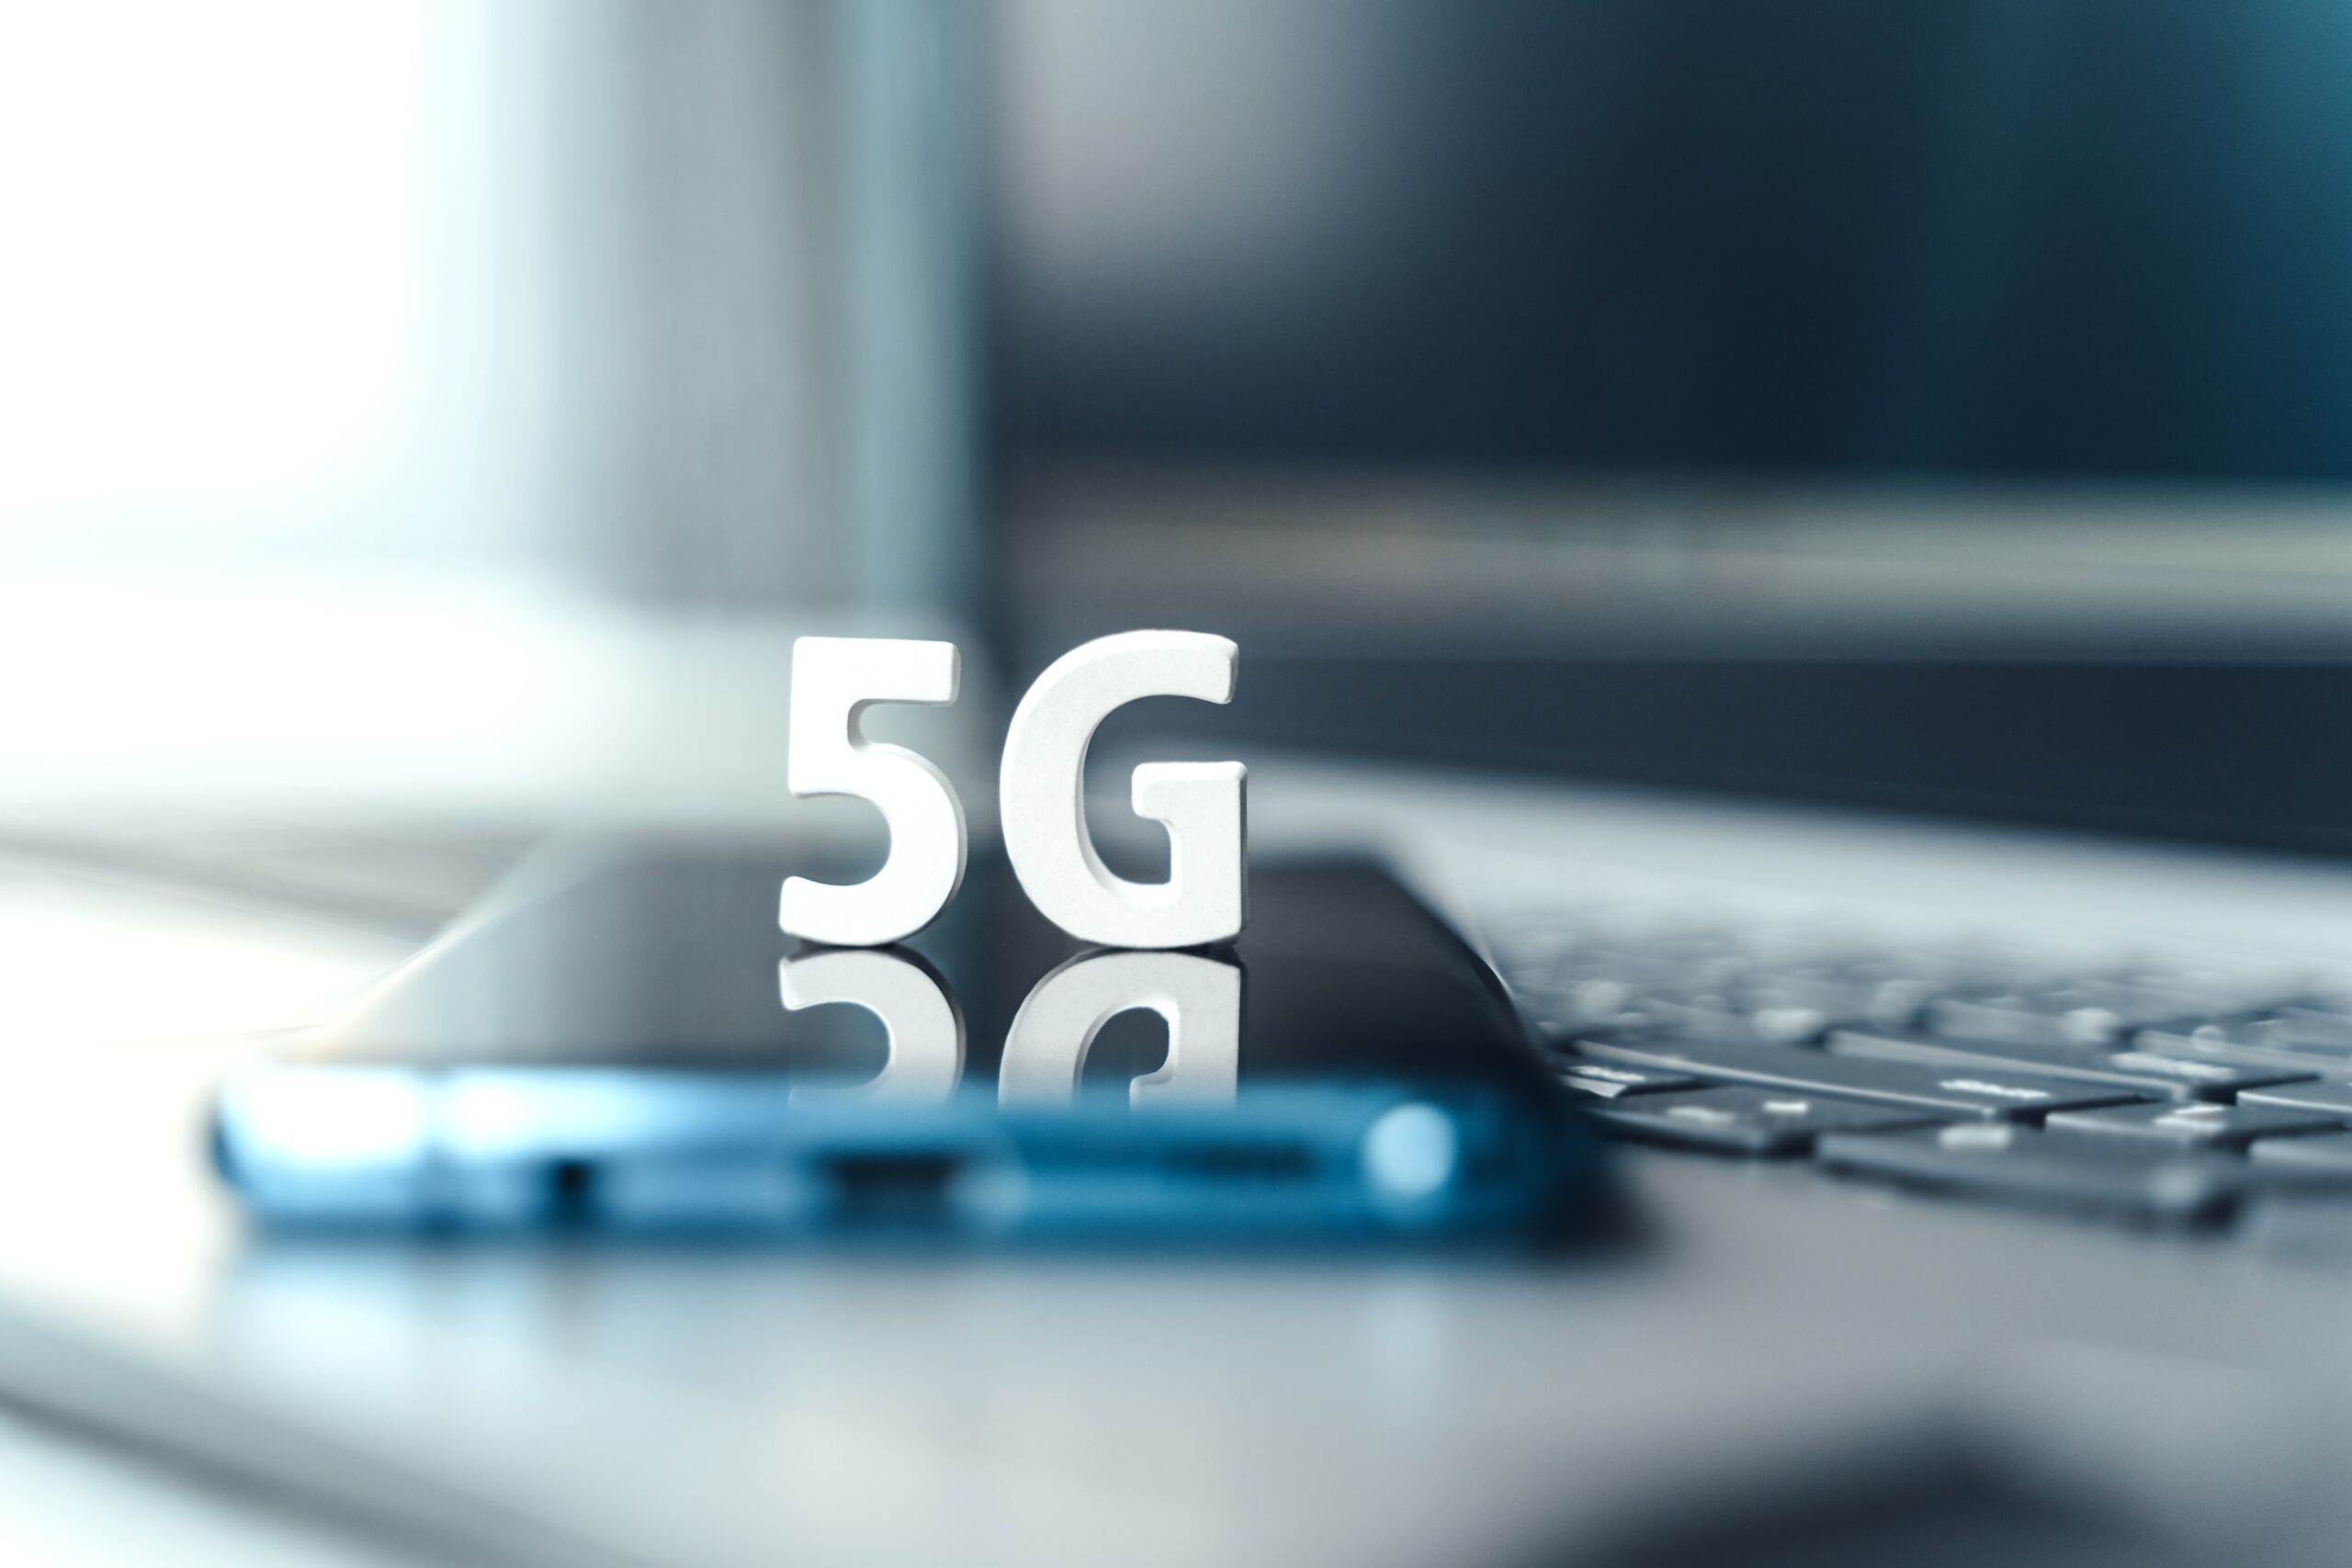 Nokia & Safaricom Complete Africa’s First 5G Network Slicing Trial